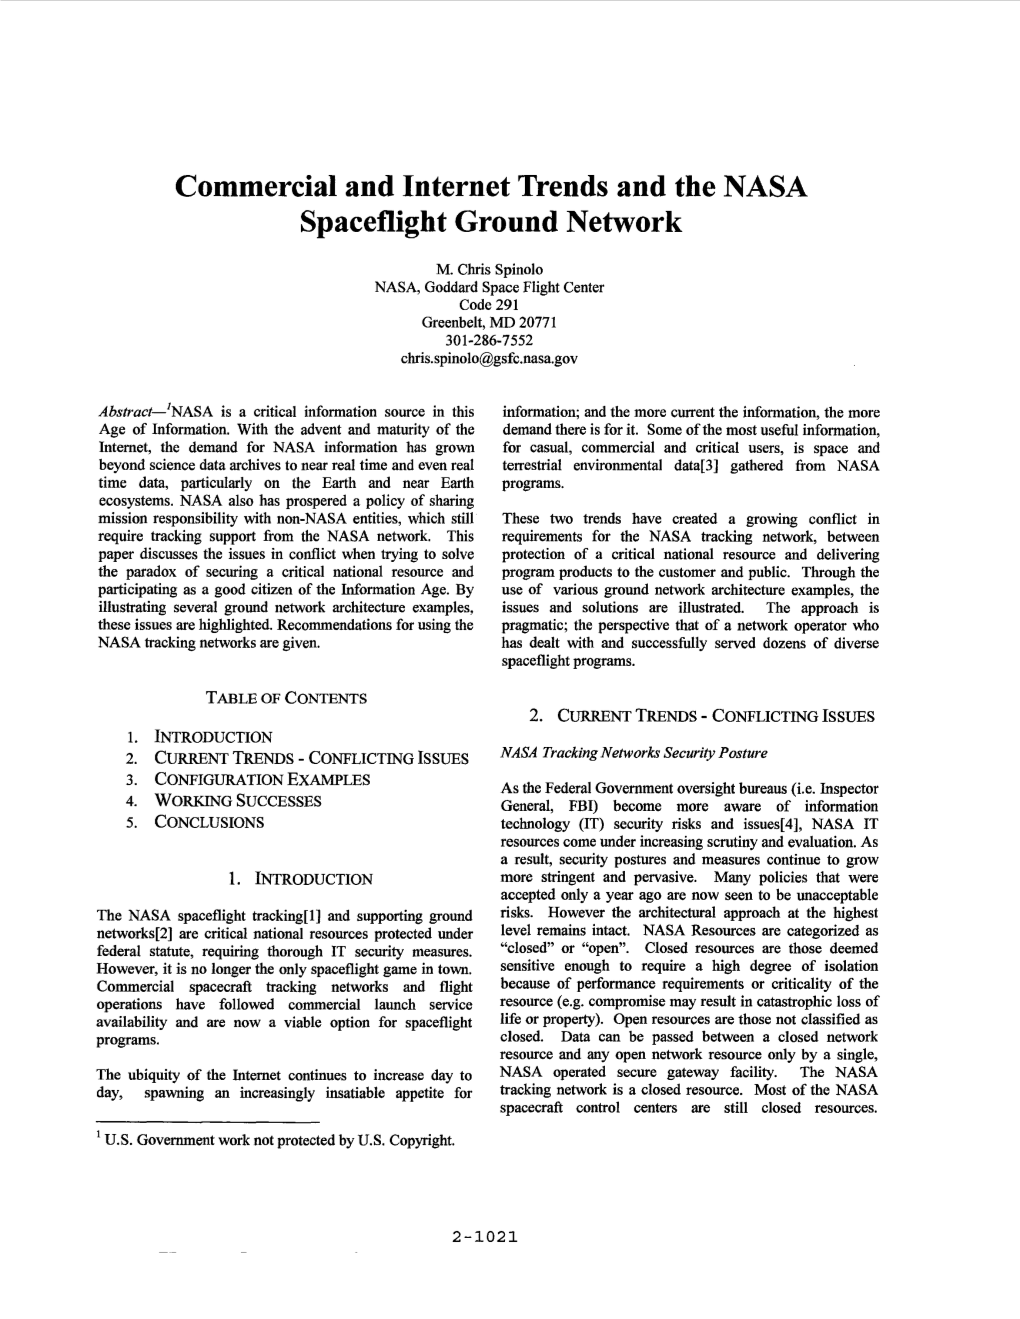 Commercial and Internet Trends and the NASA Spaceflight Ground Network